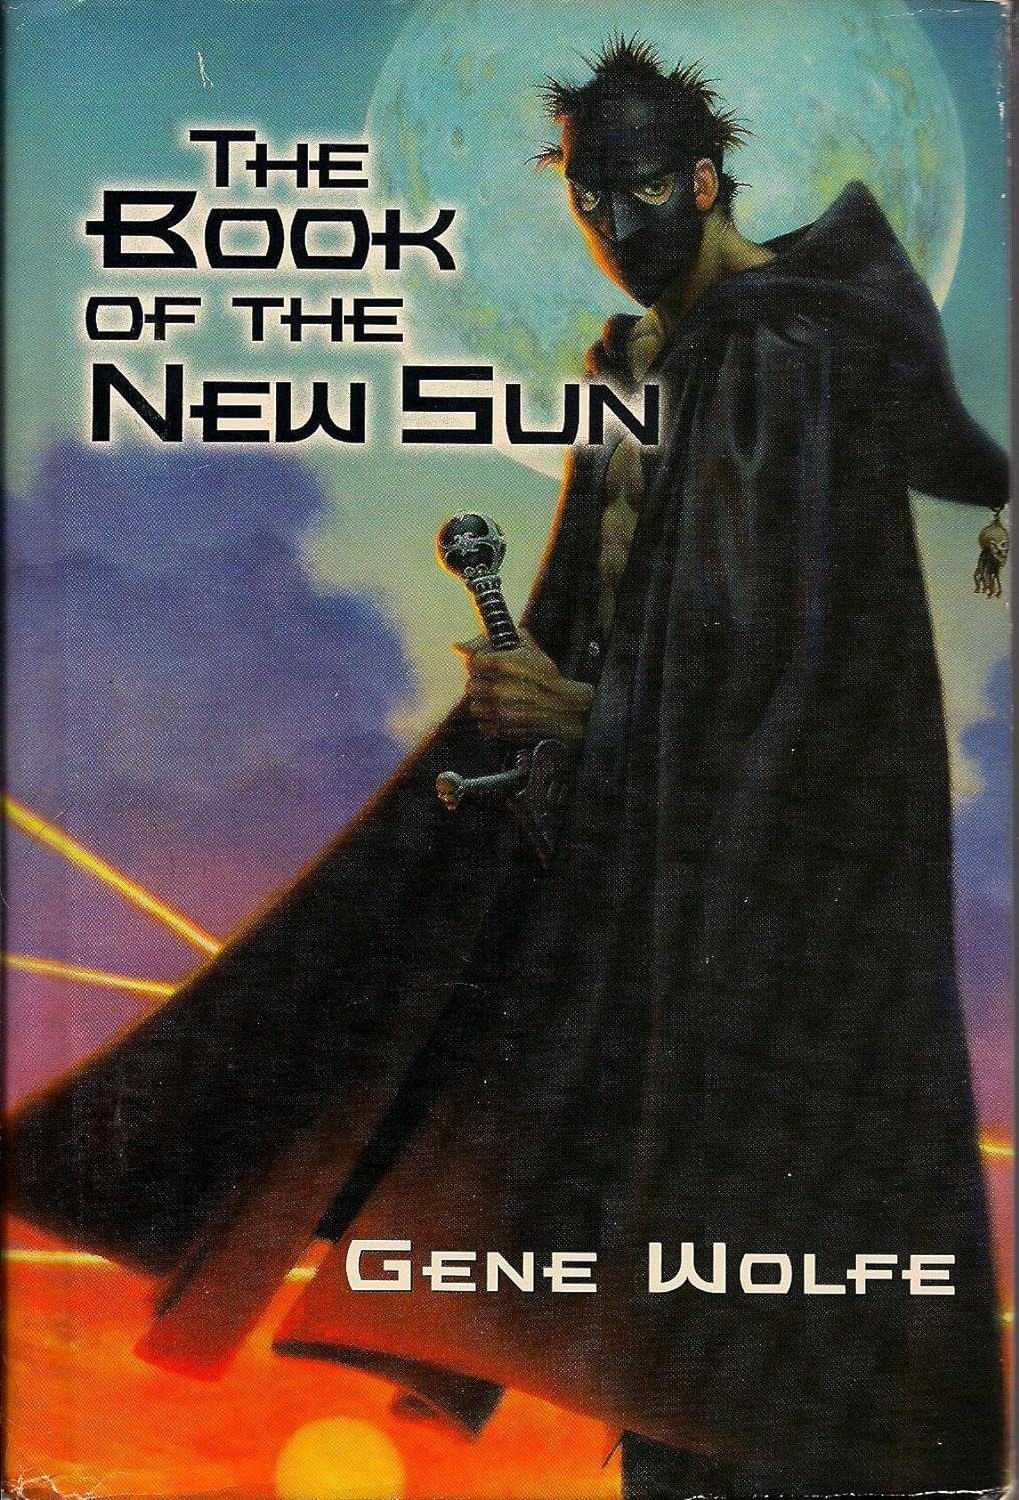 The Book of the New Sun Series by Gene Wolfe